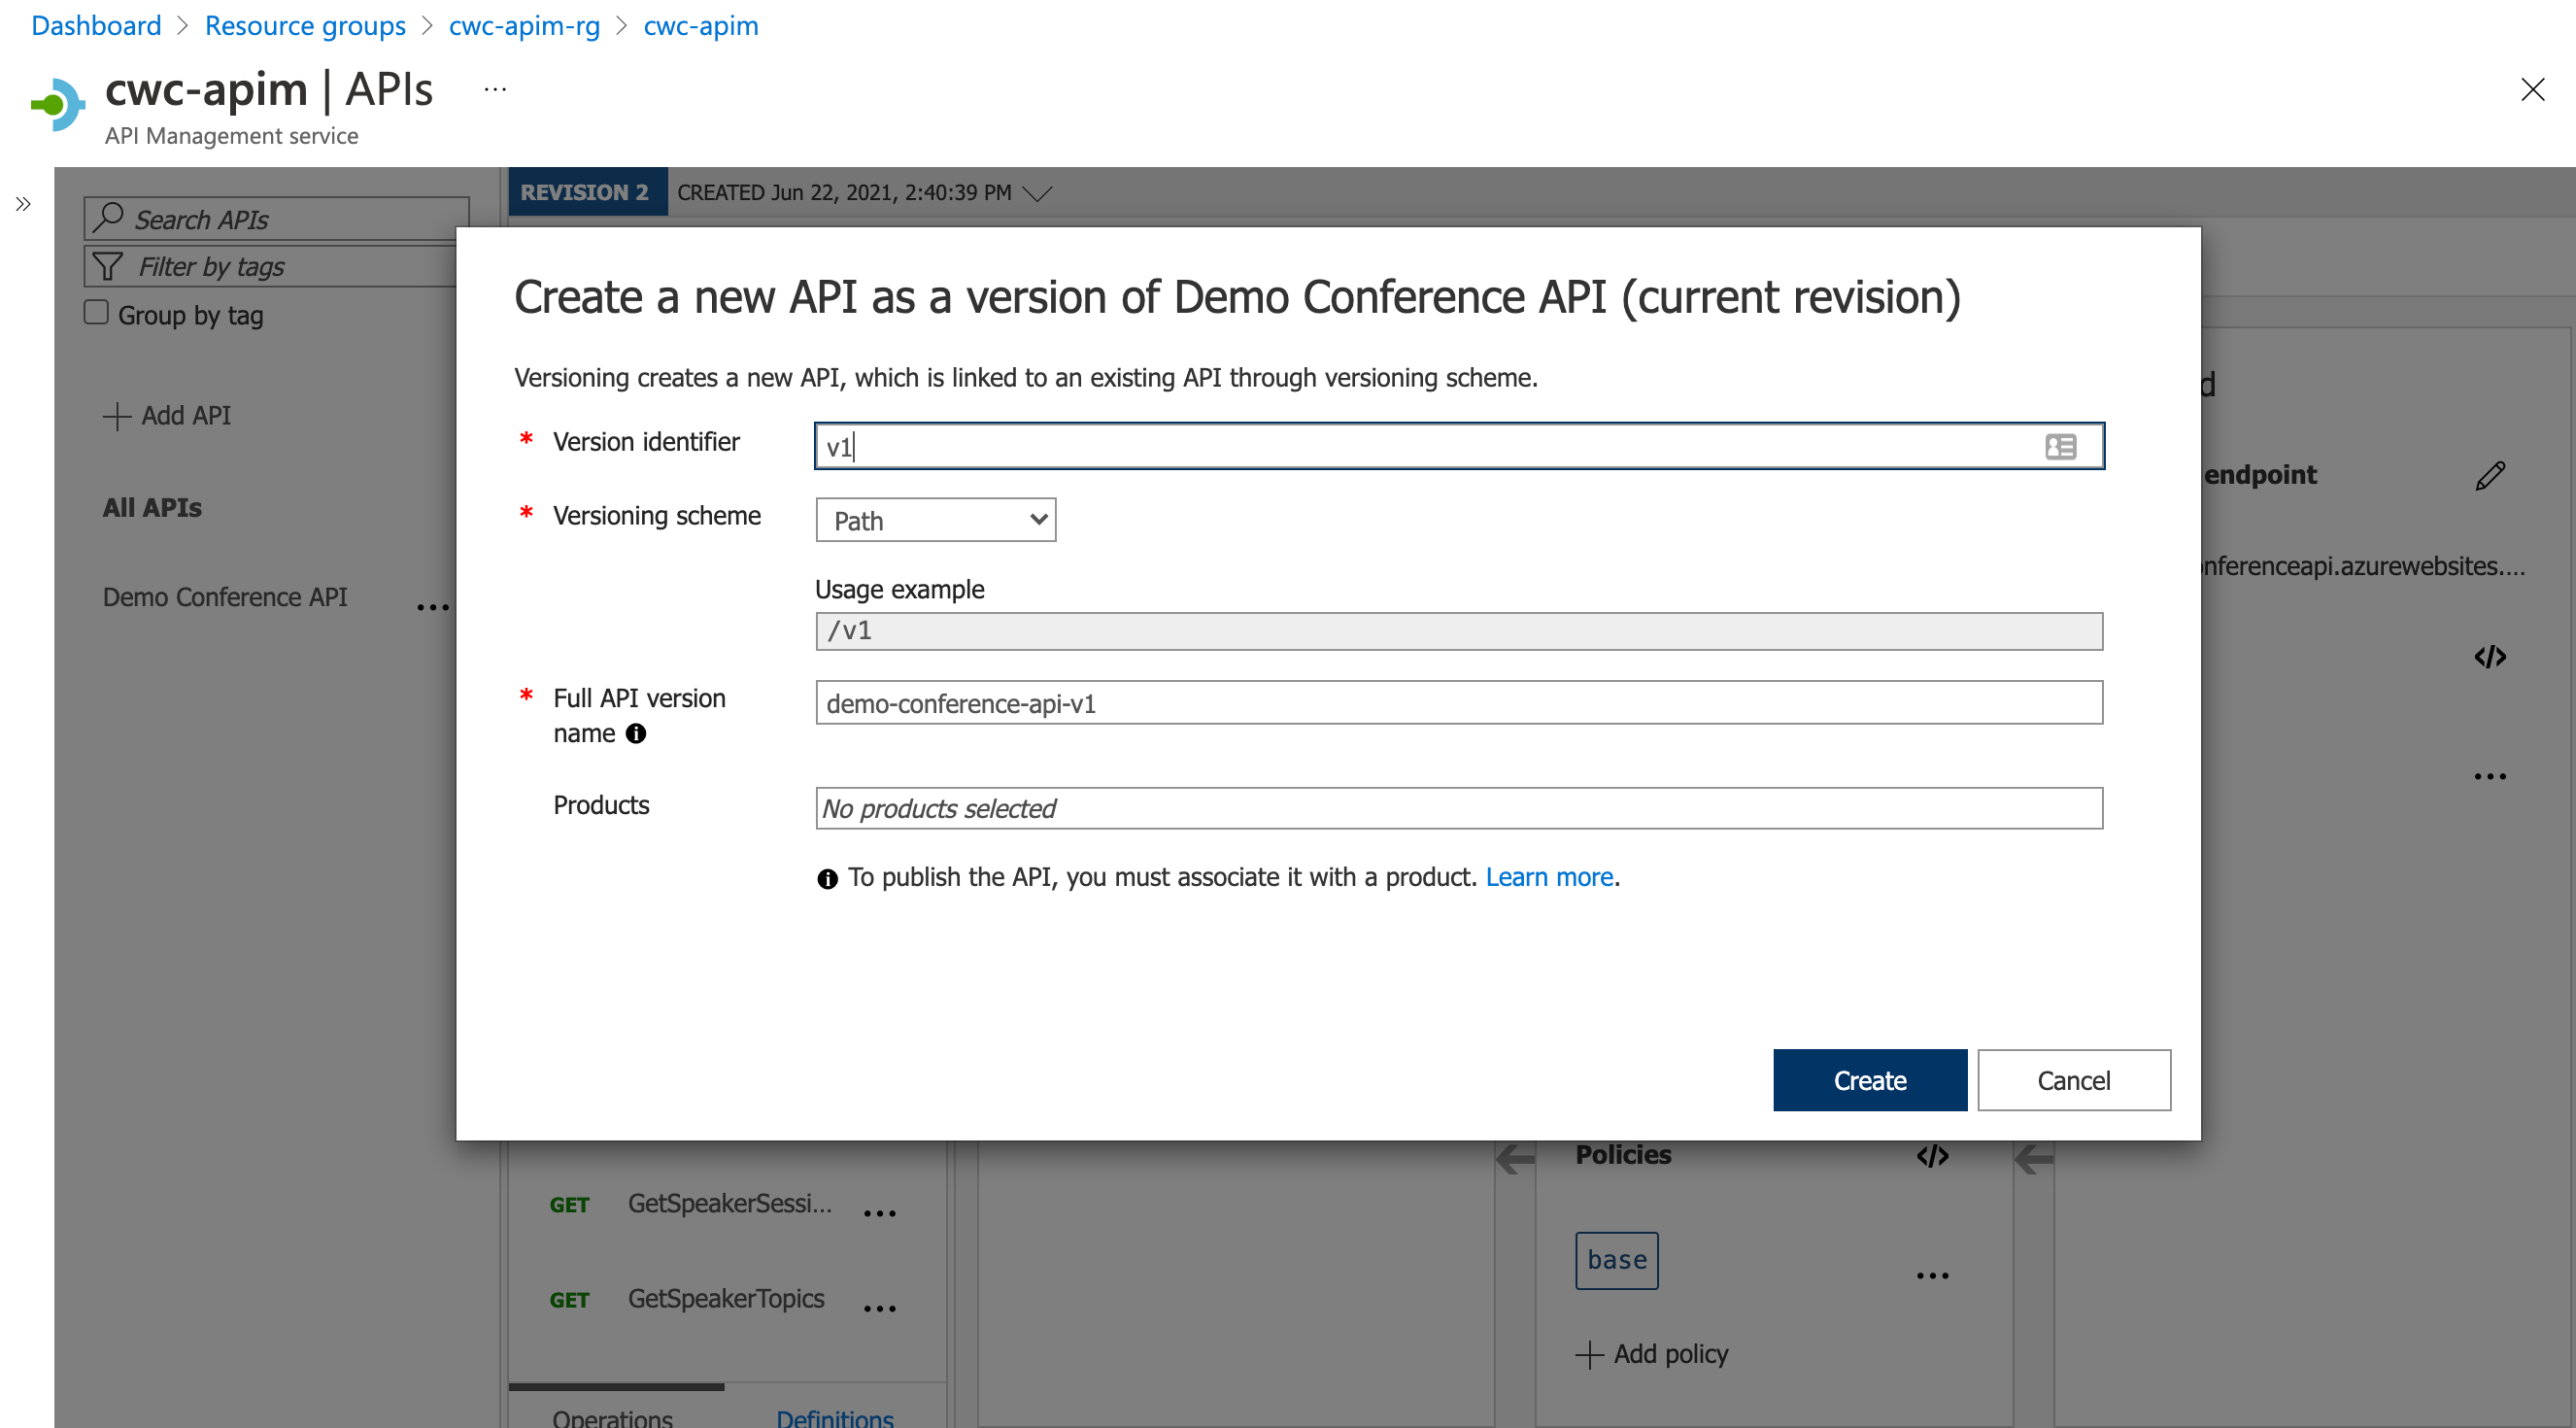 Screenshot showing the creation experience for a new API version